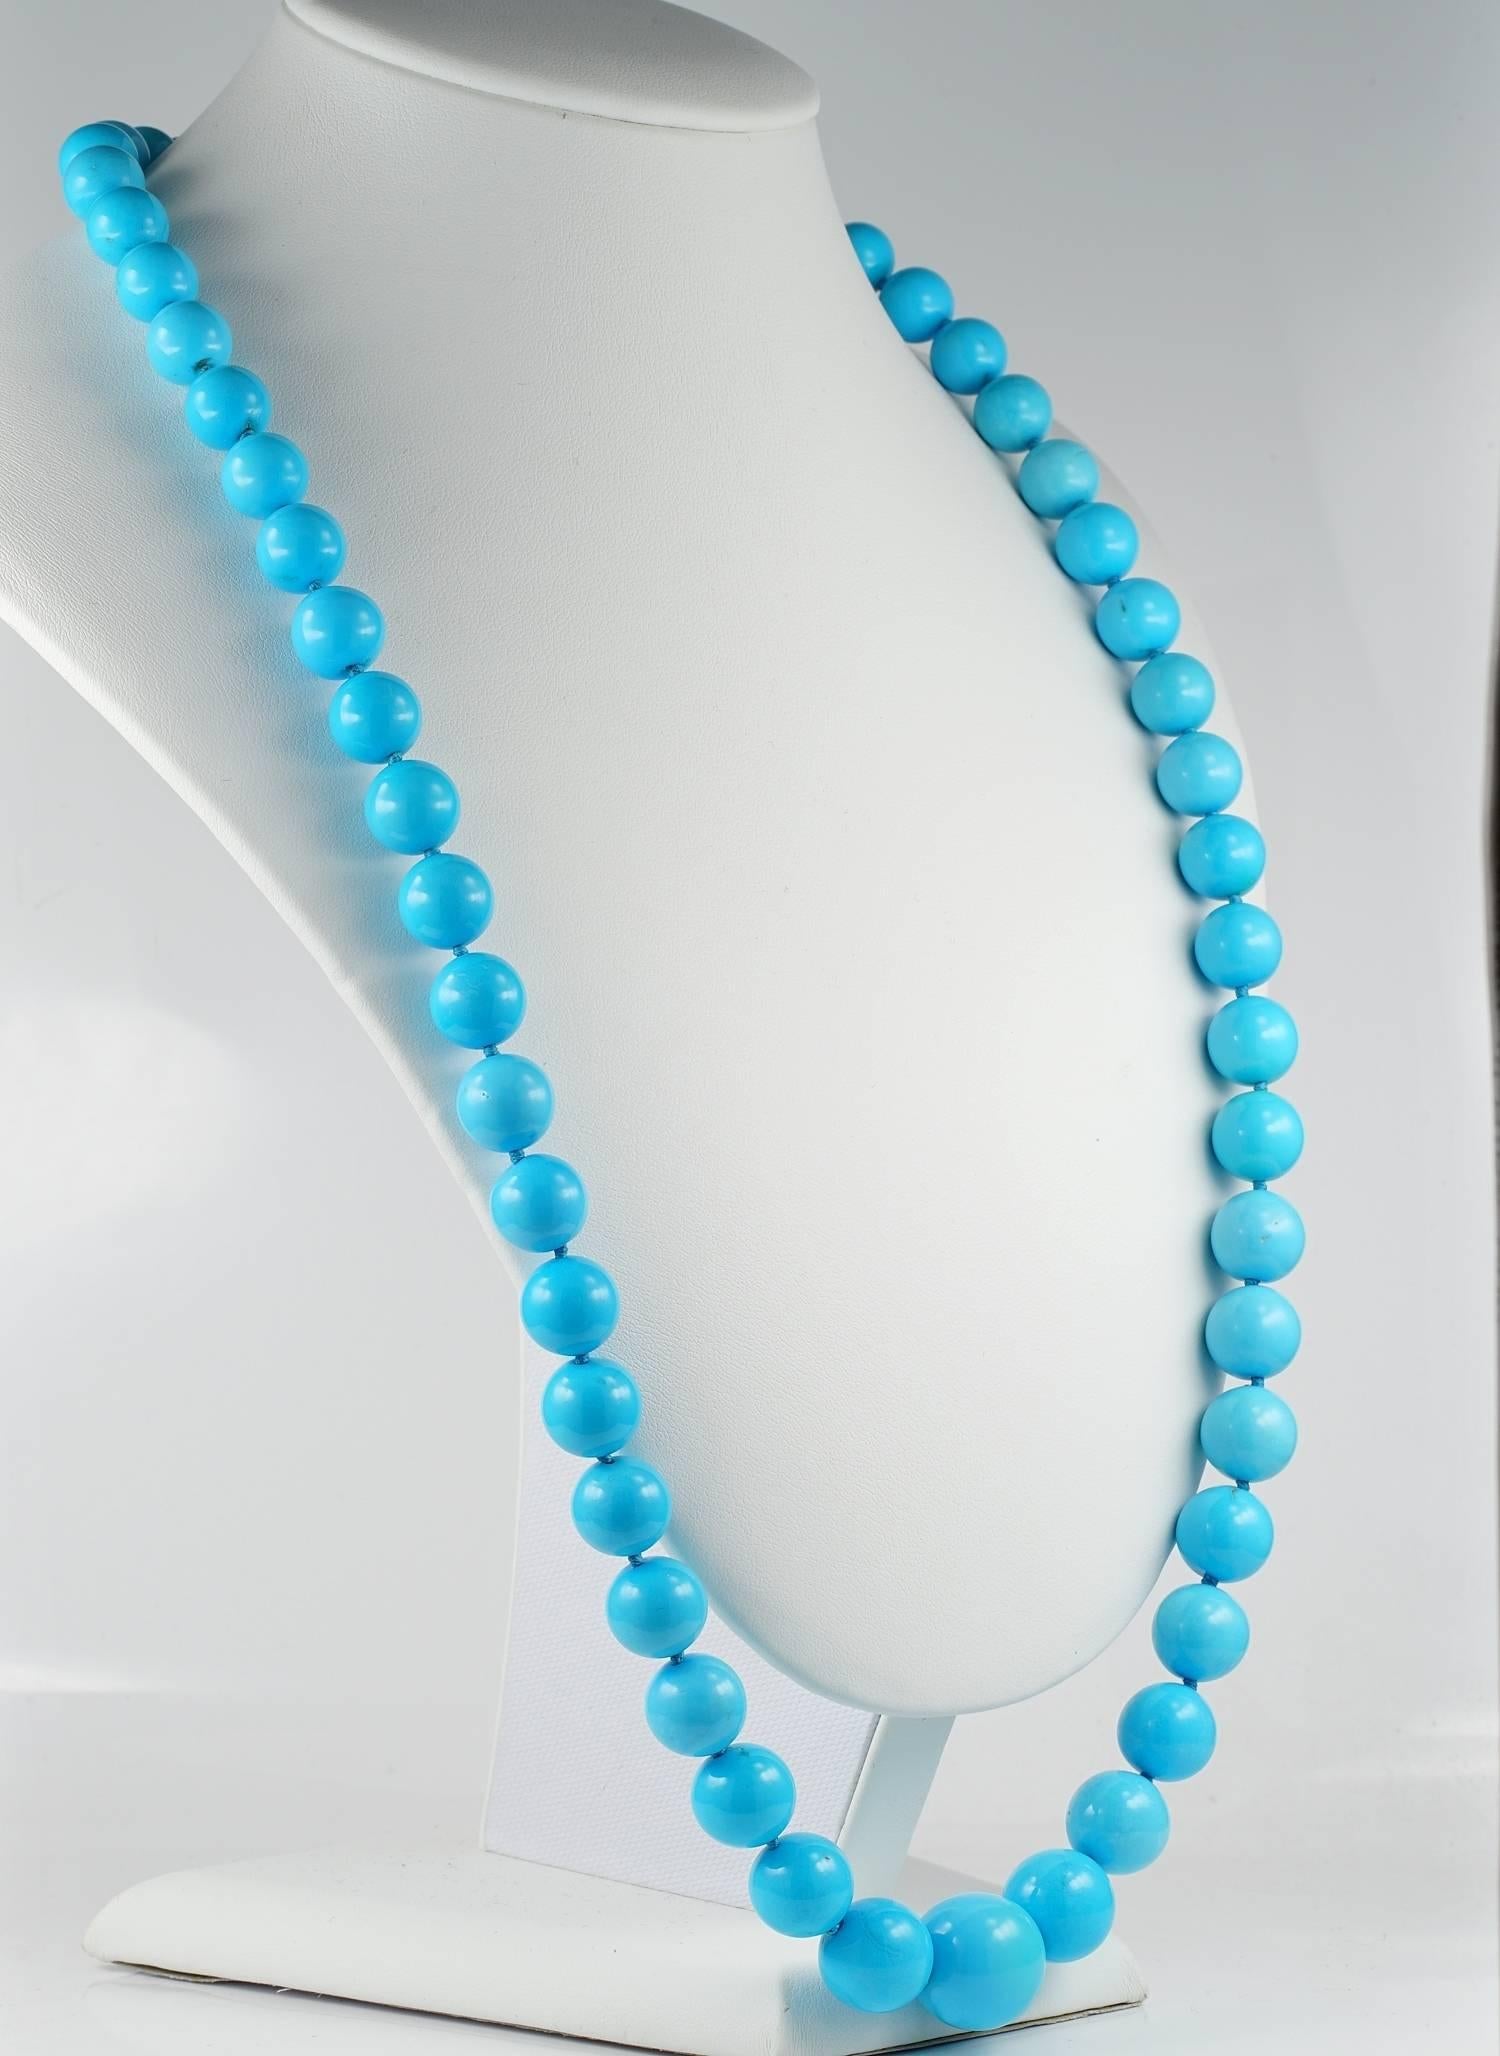 Extremely fine, rare natural untreated Persian Turquoise necklace
Italian origin dating 1960 ca.
Spectacular top colour; heaven sky colour - not dark, not light, the perfect hue as indicated by GIA
Comes in a charming graduation of sizes ranging